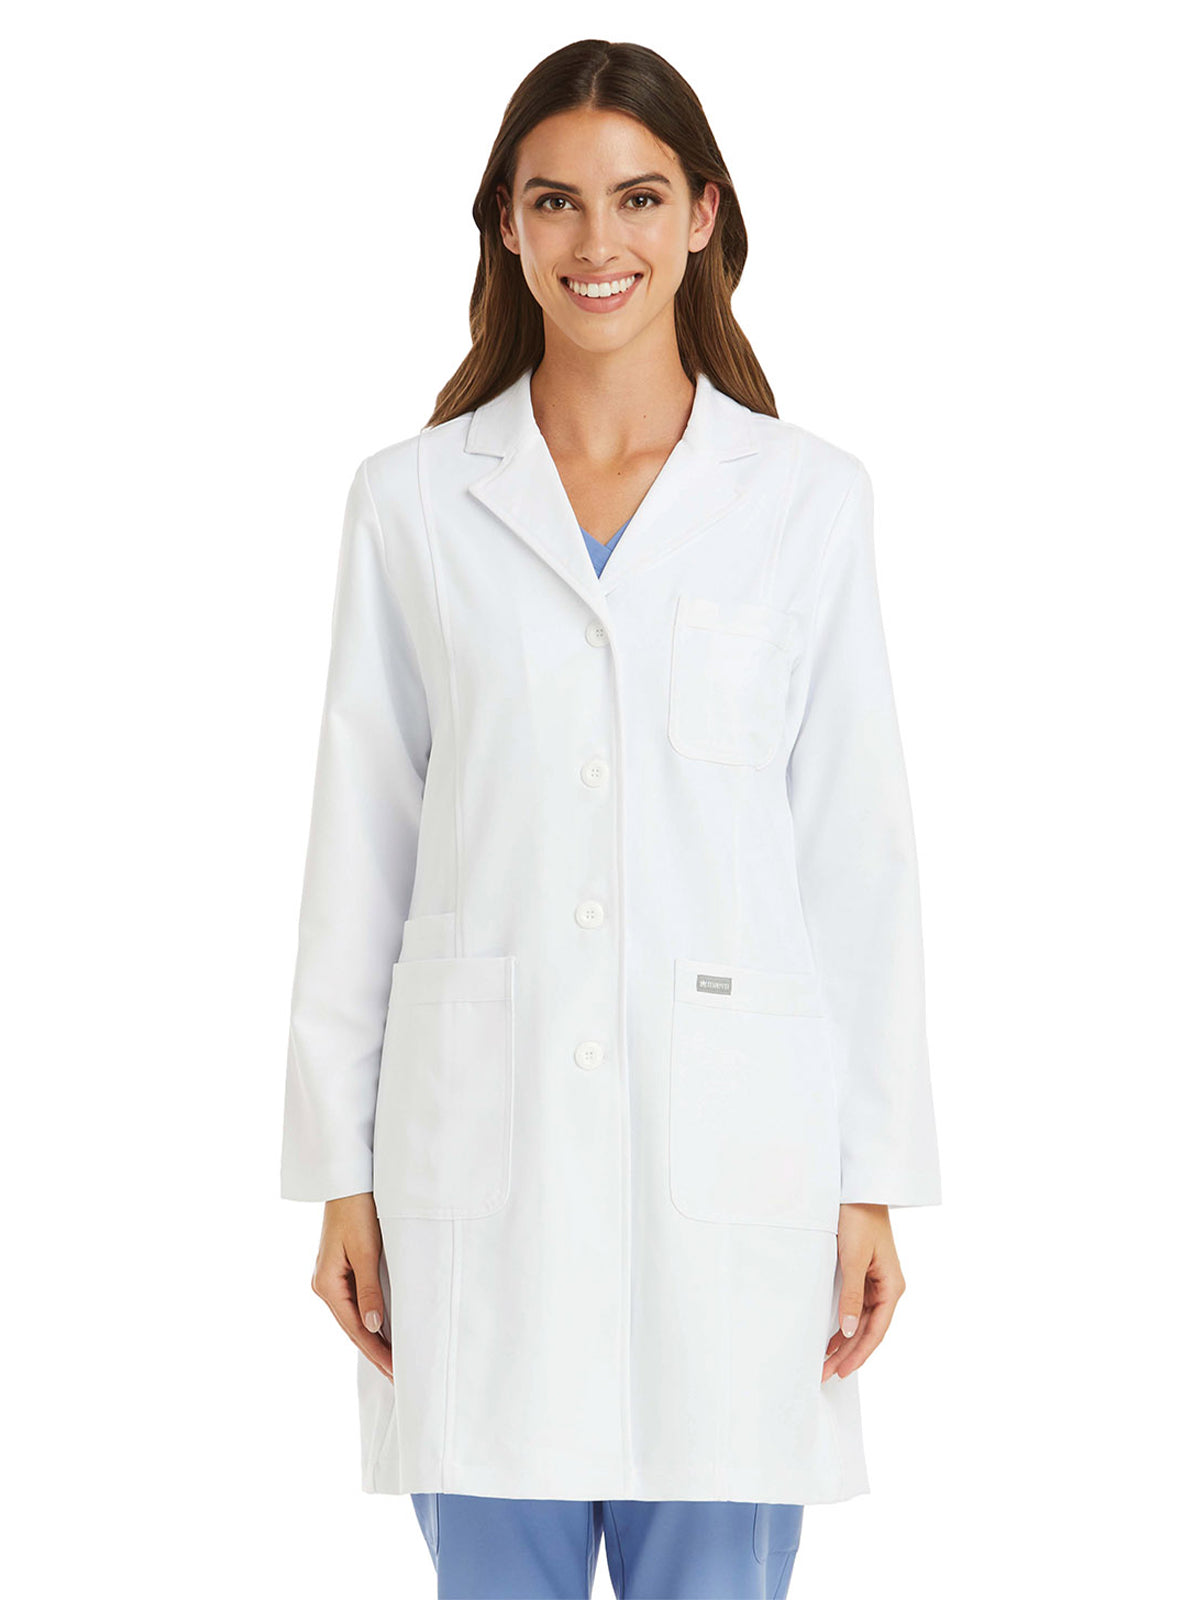 Women's Notched Collar Lab Coat